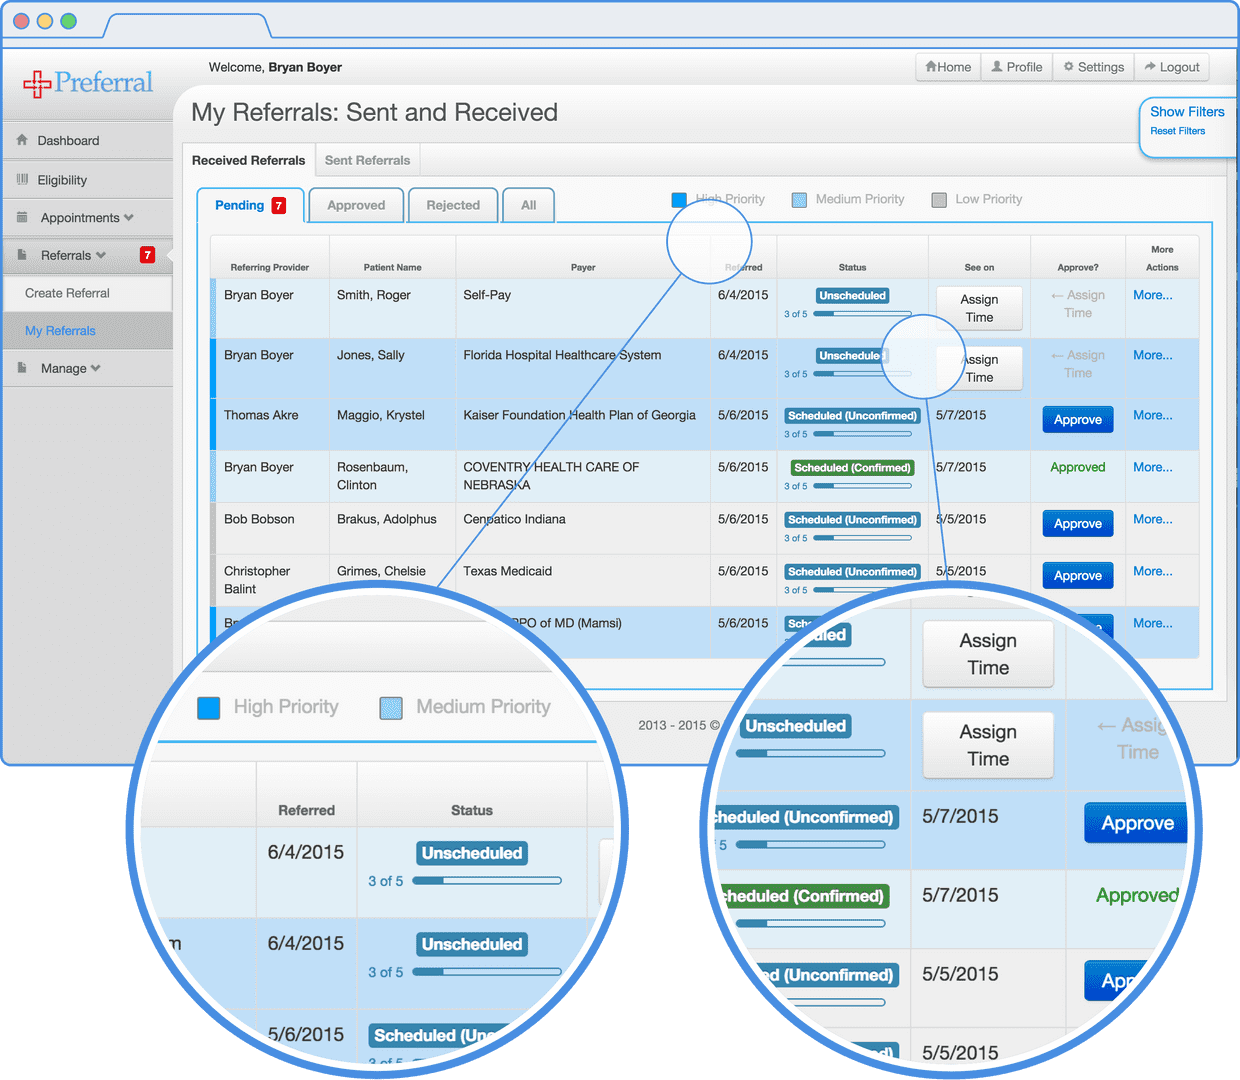 The referral inbox on Preferral allows easy management and tracking of outbound and inbound referrals